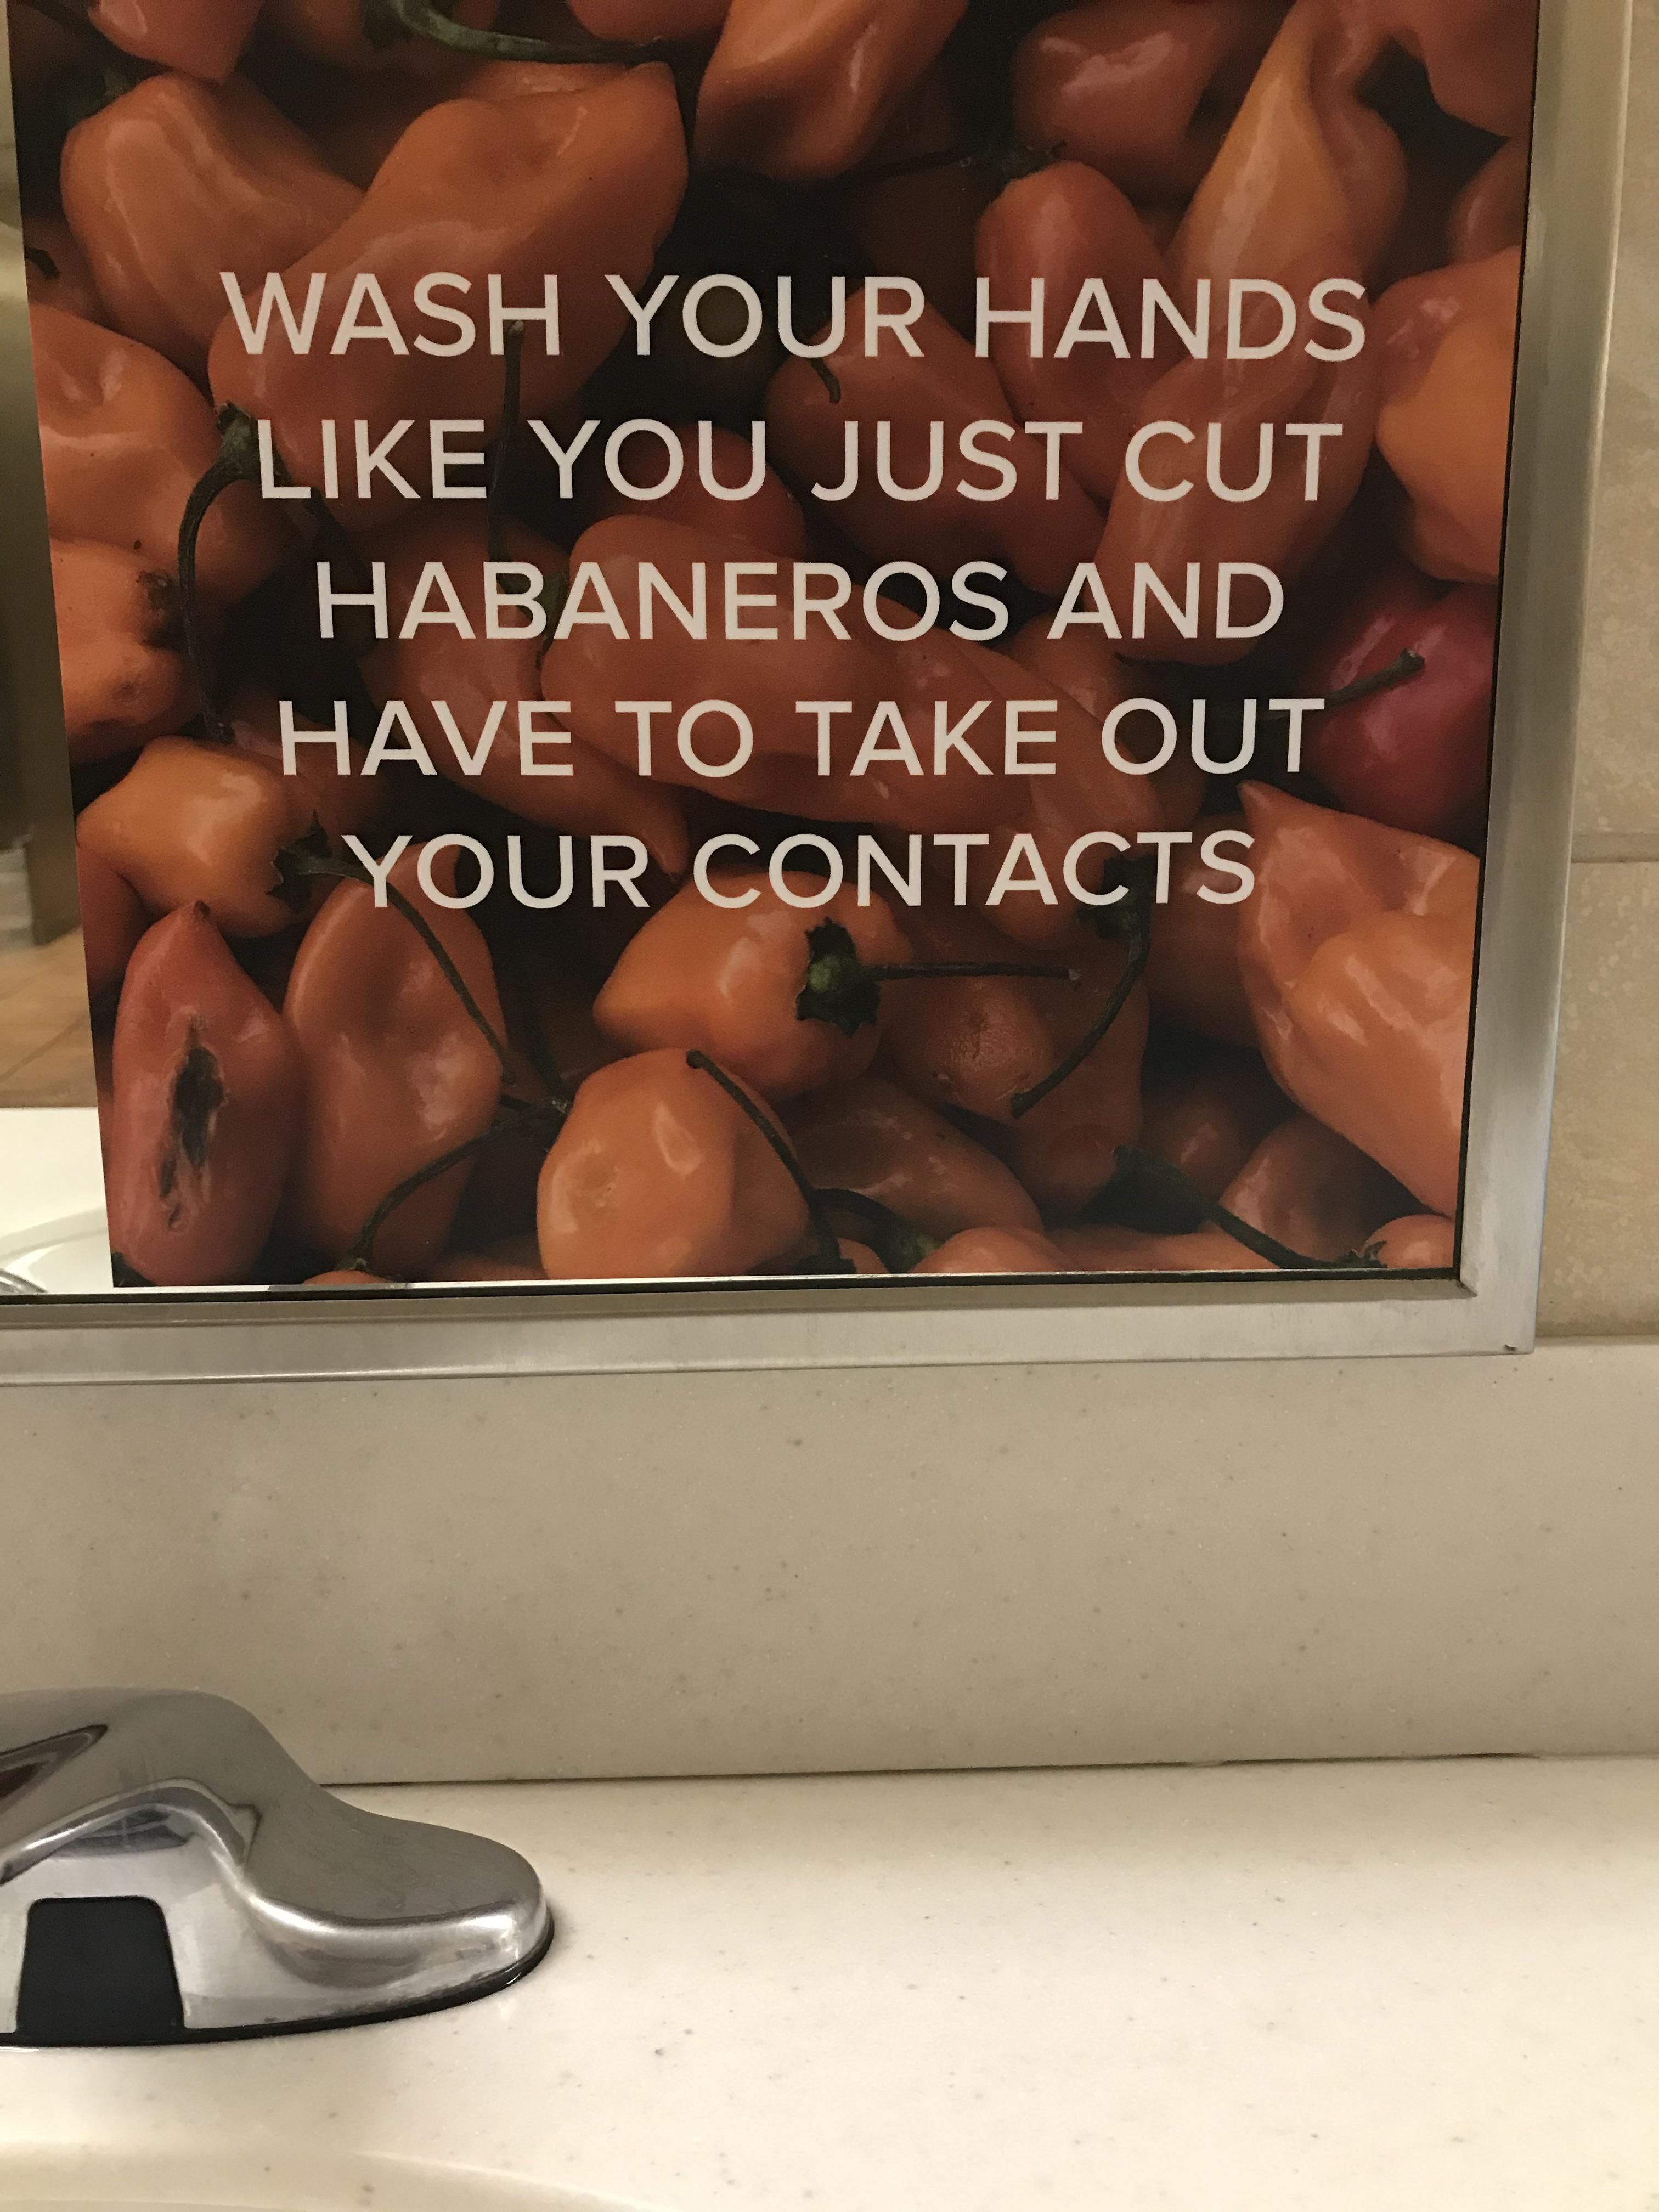 Found at a mall’s restroom